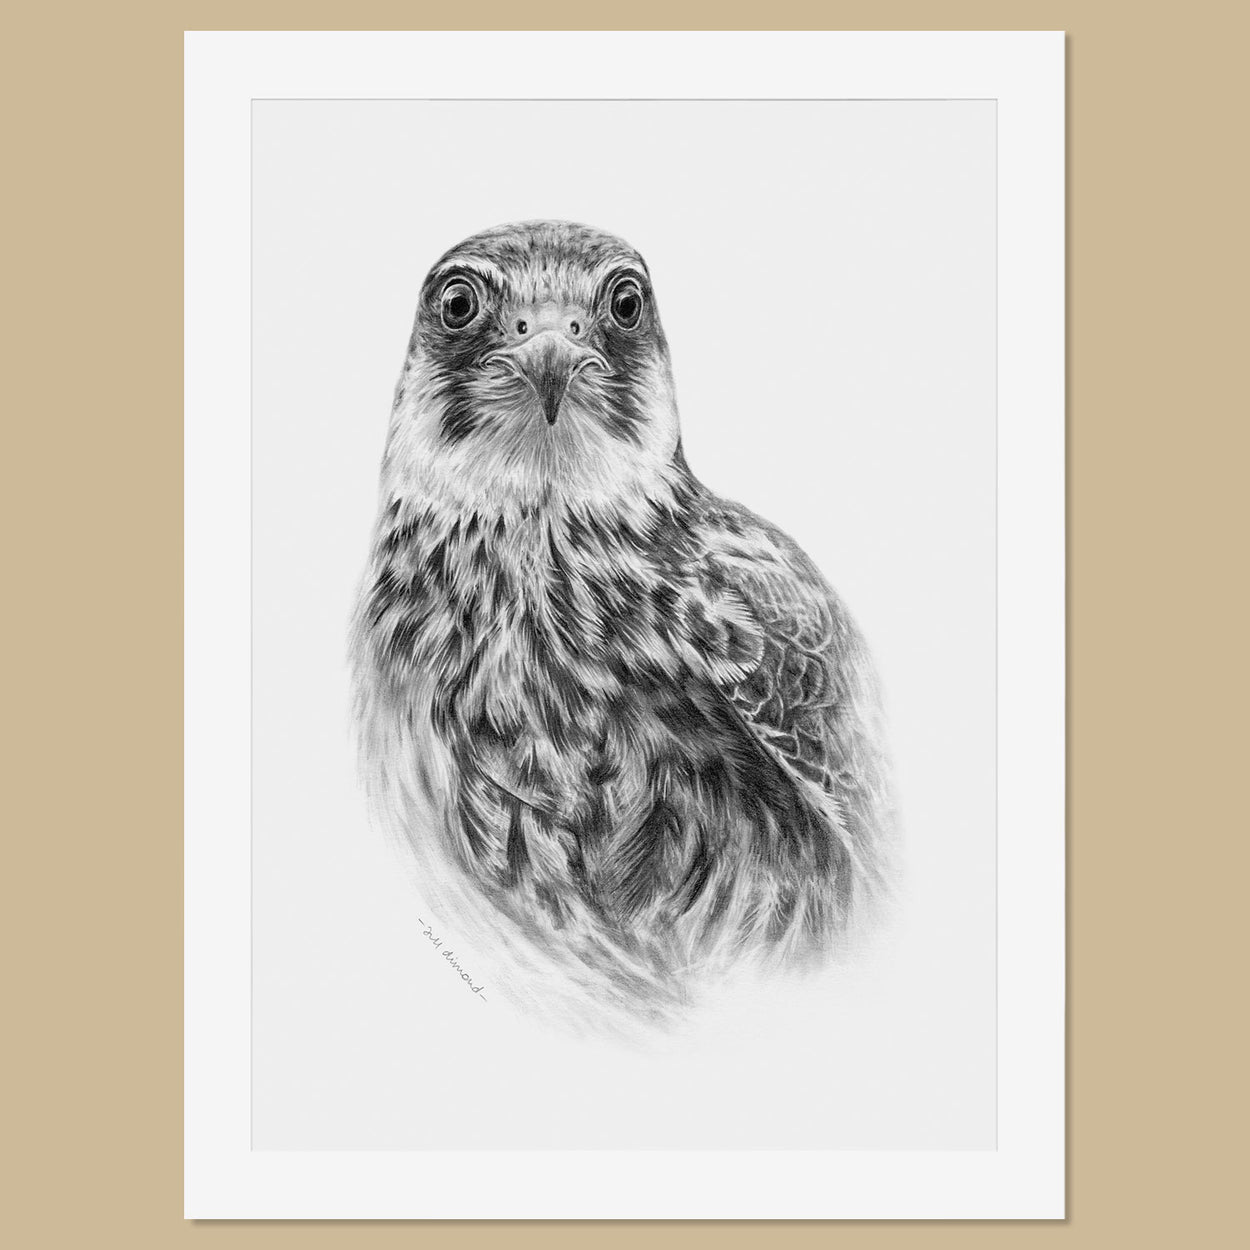 Original Hobby Pencil Drawing - The Thriving Wild